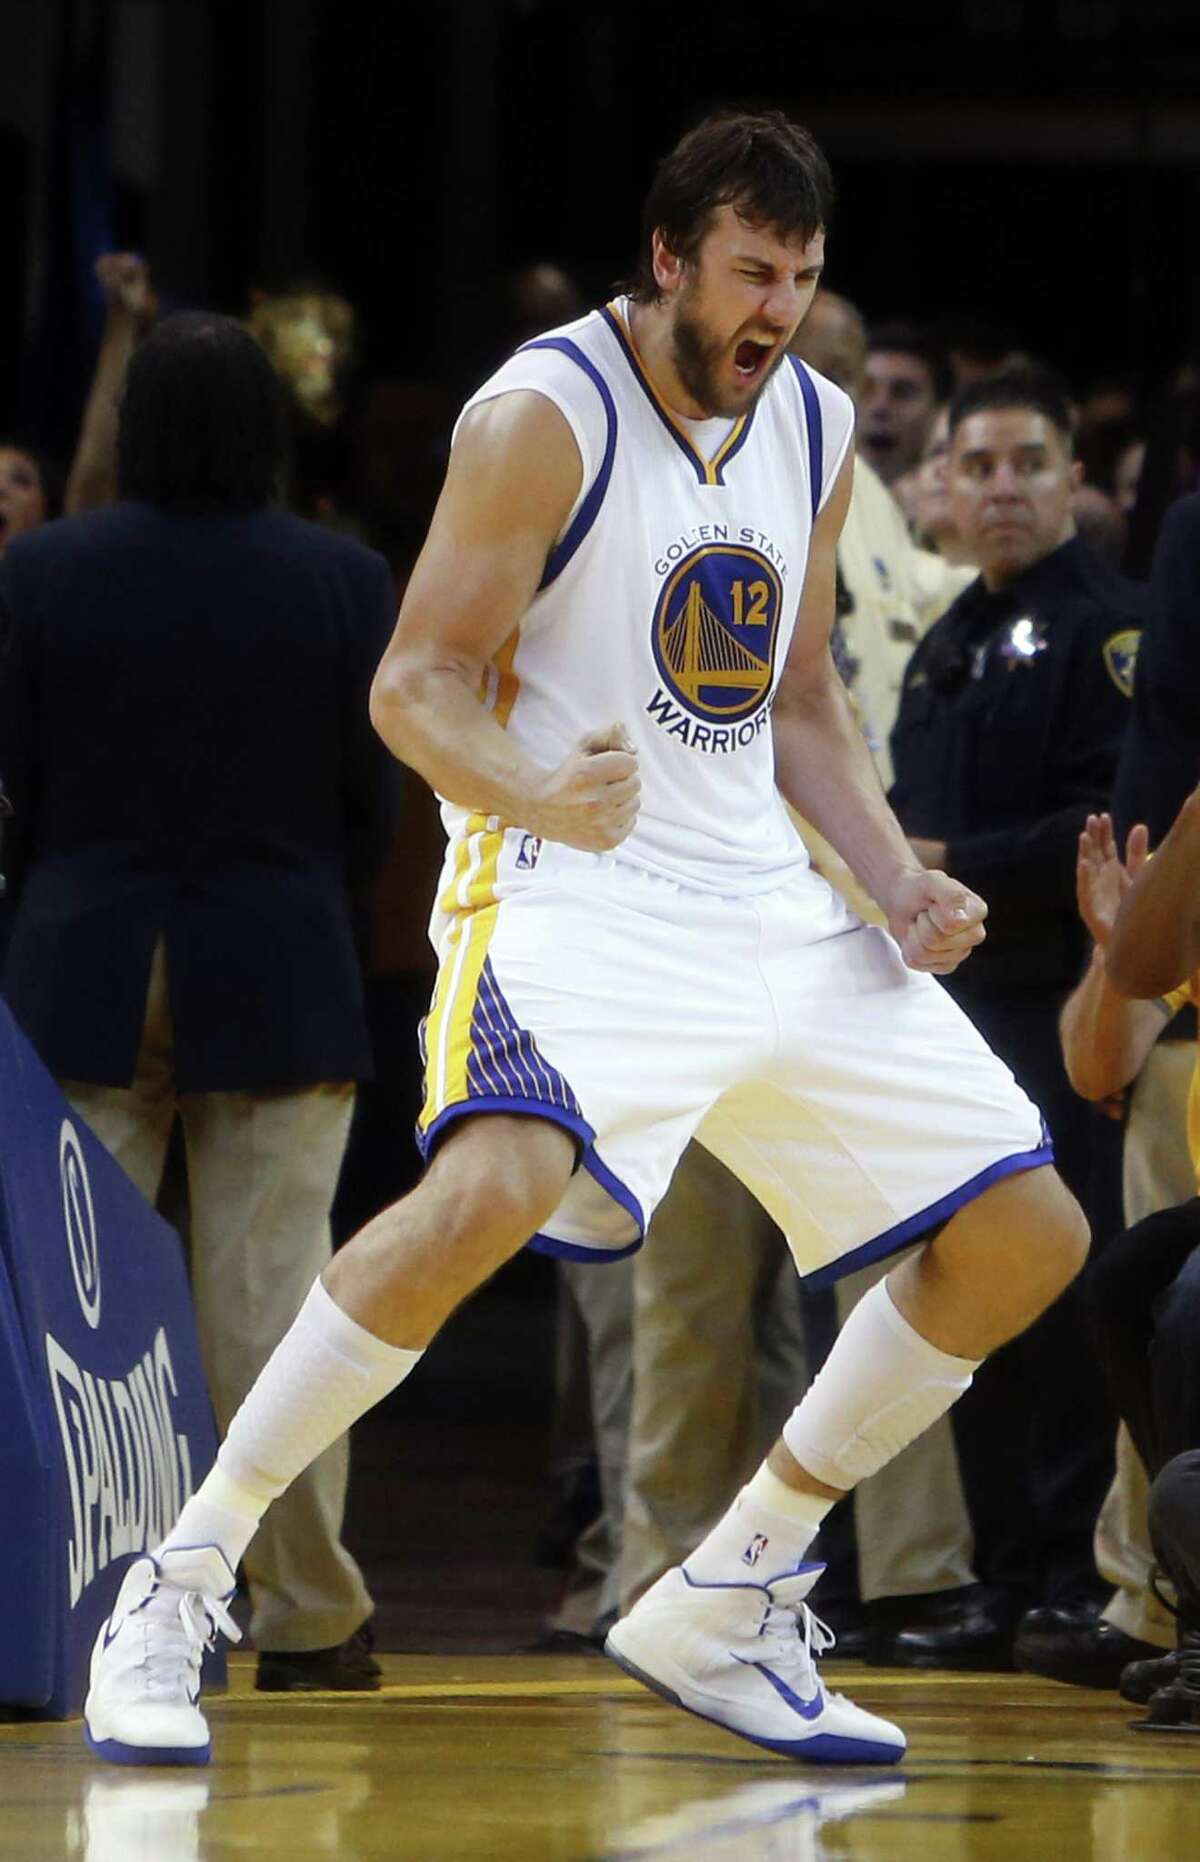 Golden State Warriors' Andrew Bogut celebrates his 4th quarter basket during 99-98 win over Houston Rockets in Game 2 of NBA Playoffs' Western Conference Finals at Oracle Arena in Oakland, Calif., on Thursday, May 21, 2015.